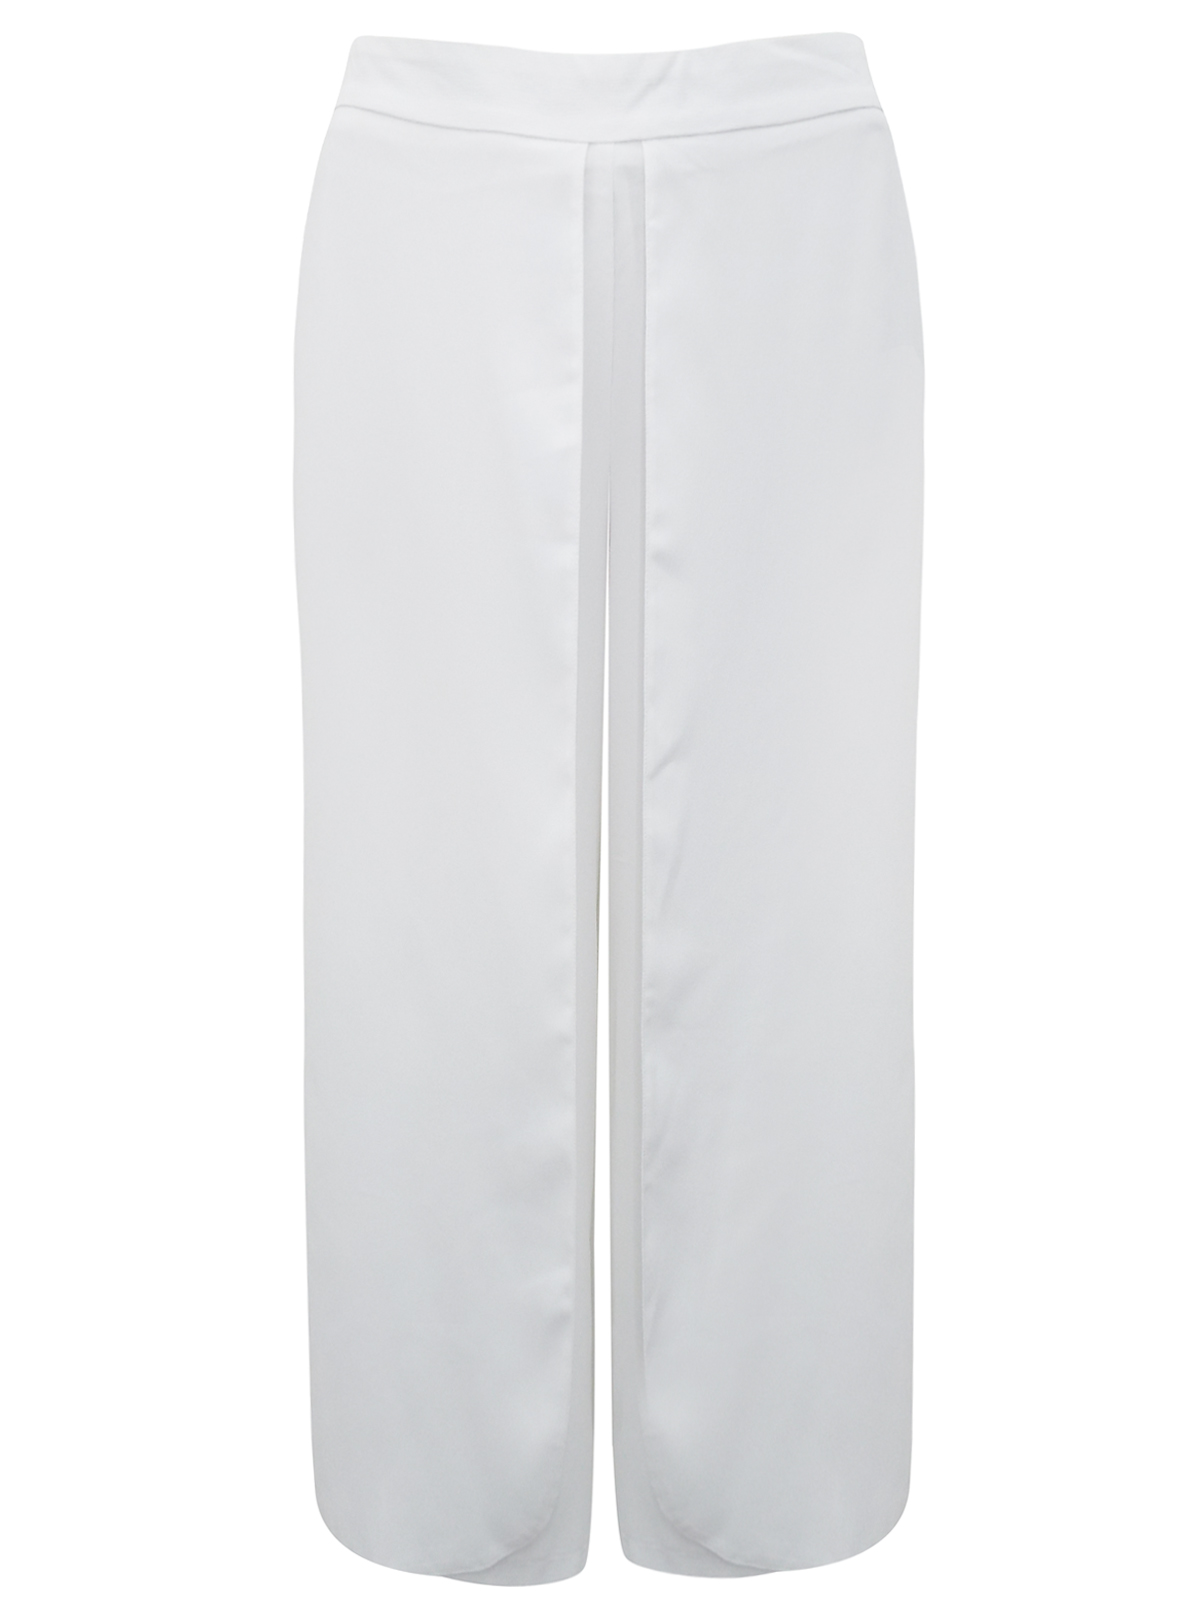 3vans WHITE Overlay Wide Leg Trousers - Plus Size 16 to 28